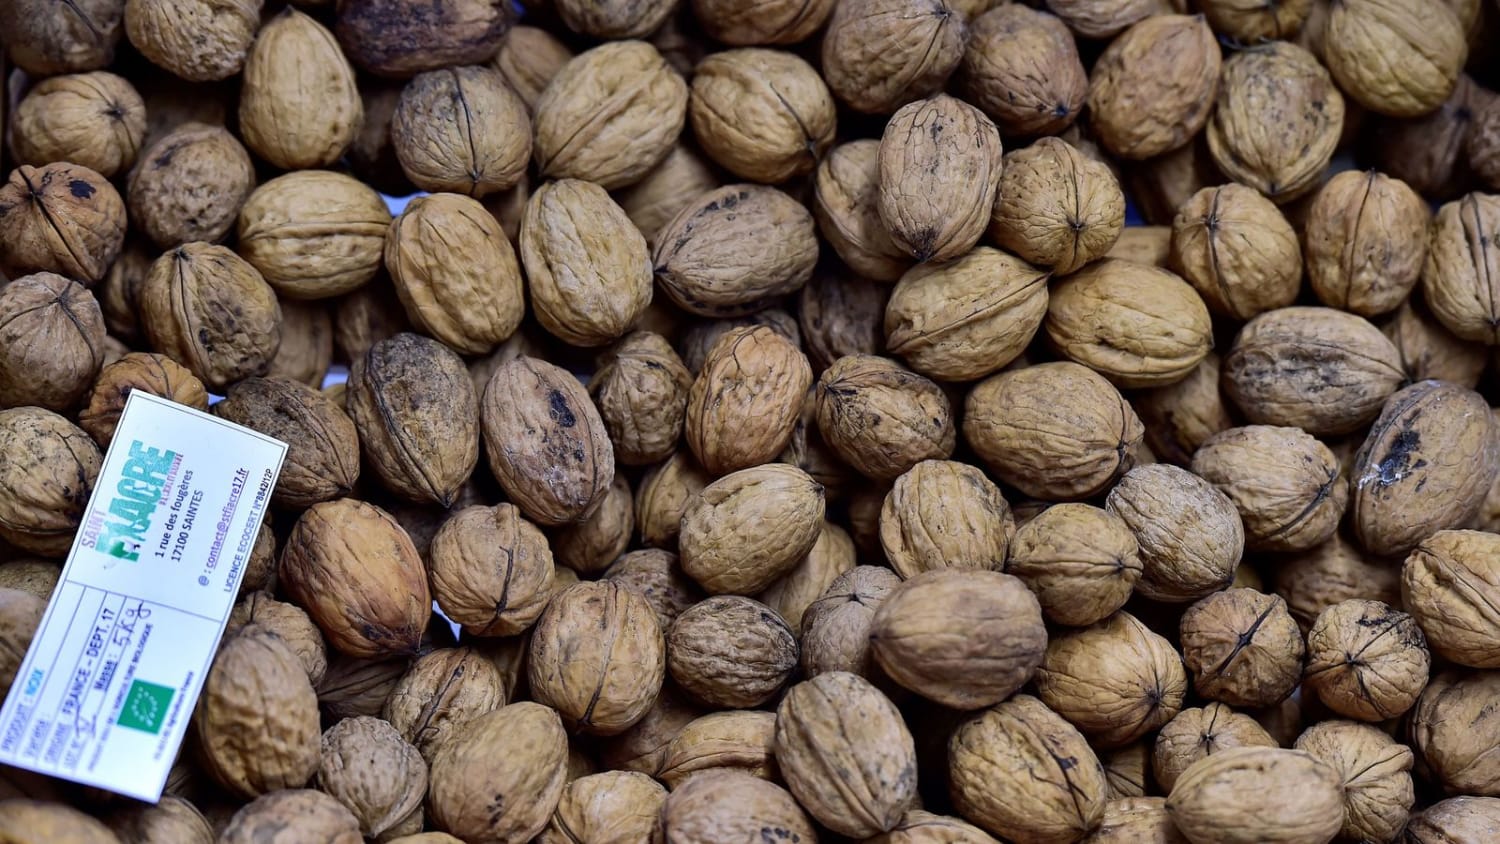 Eating more nuts could slow weight gain, researchers say